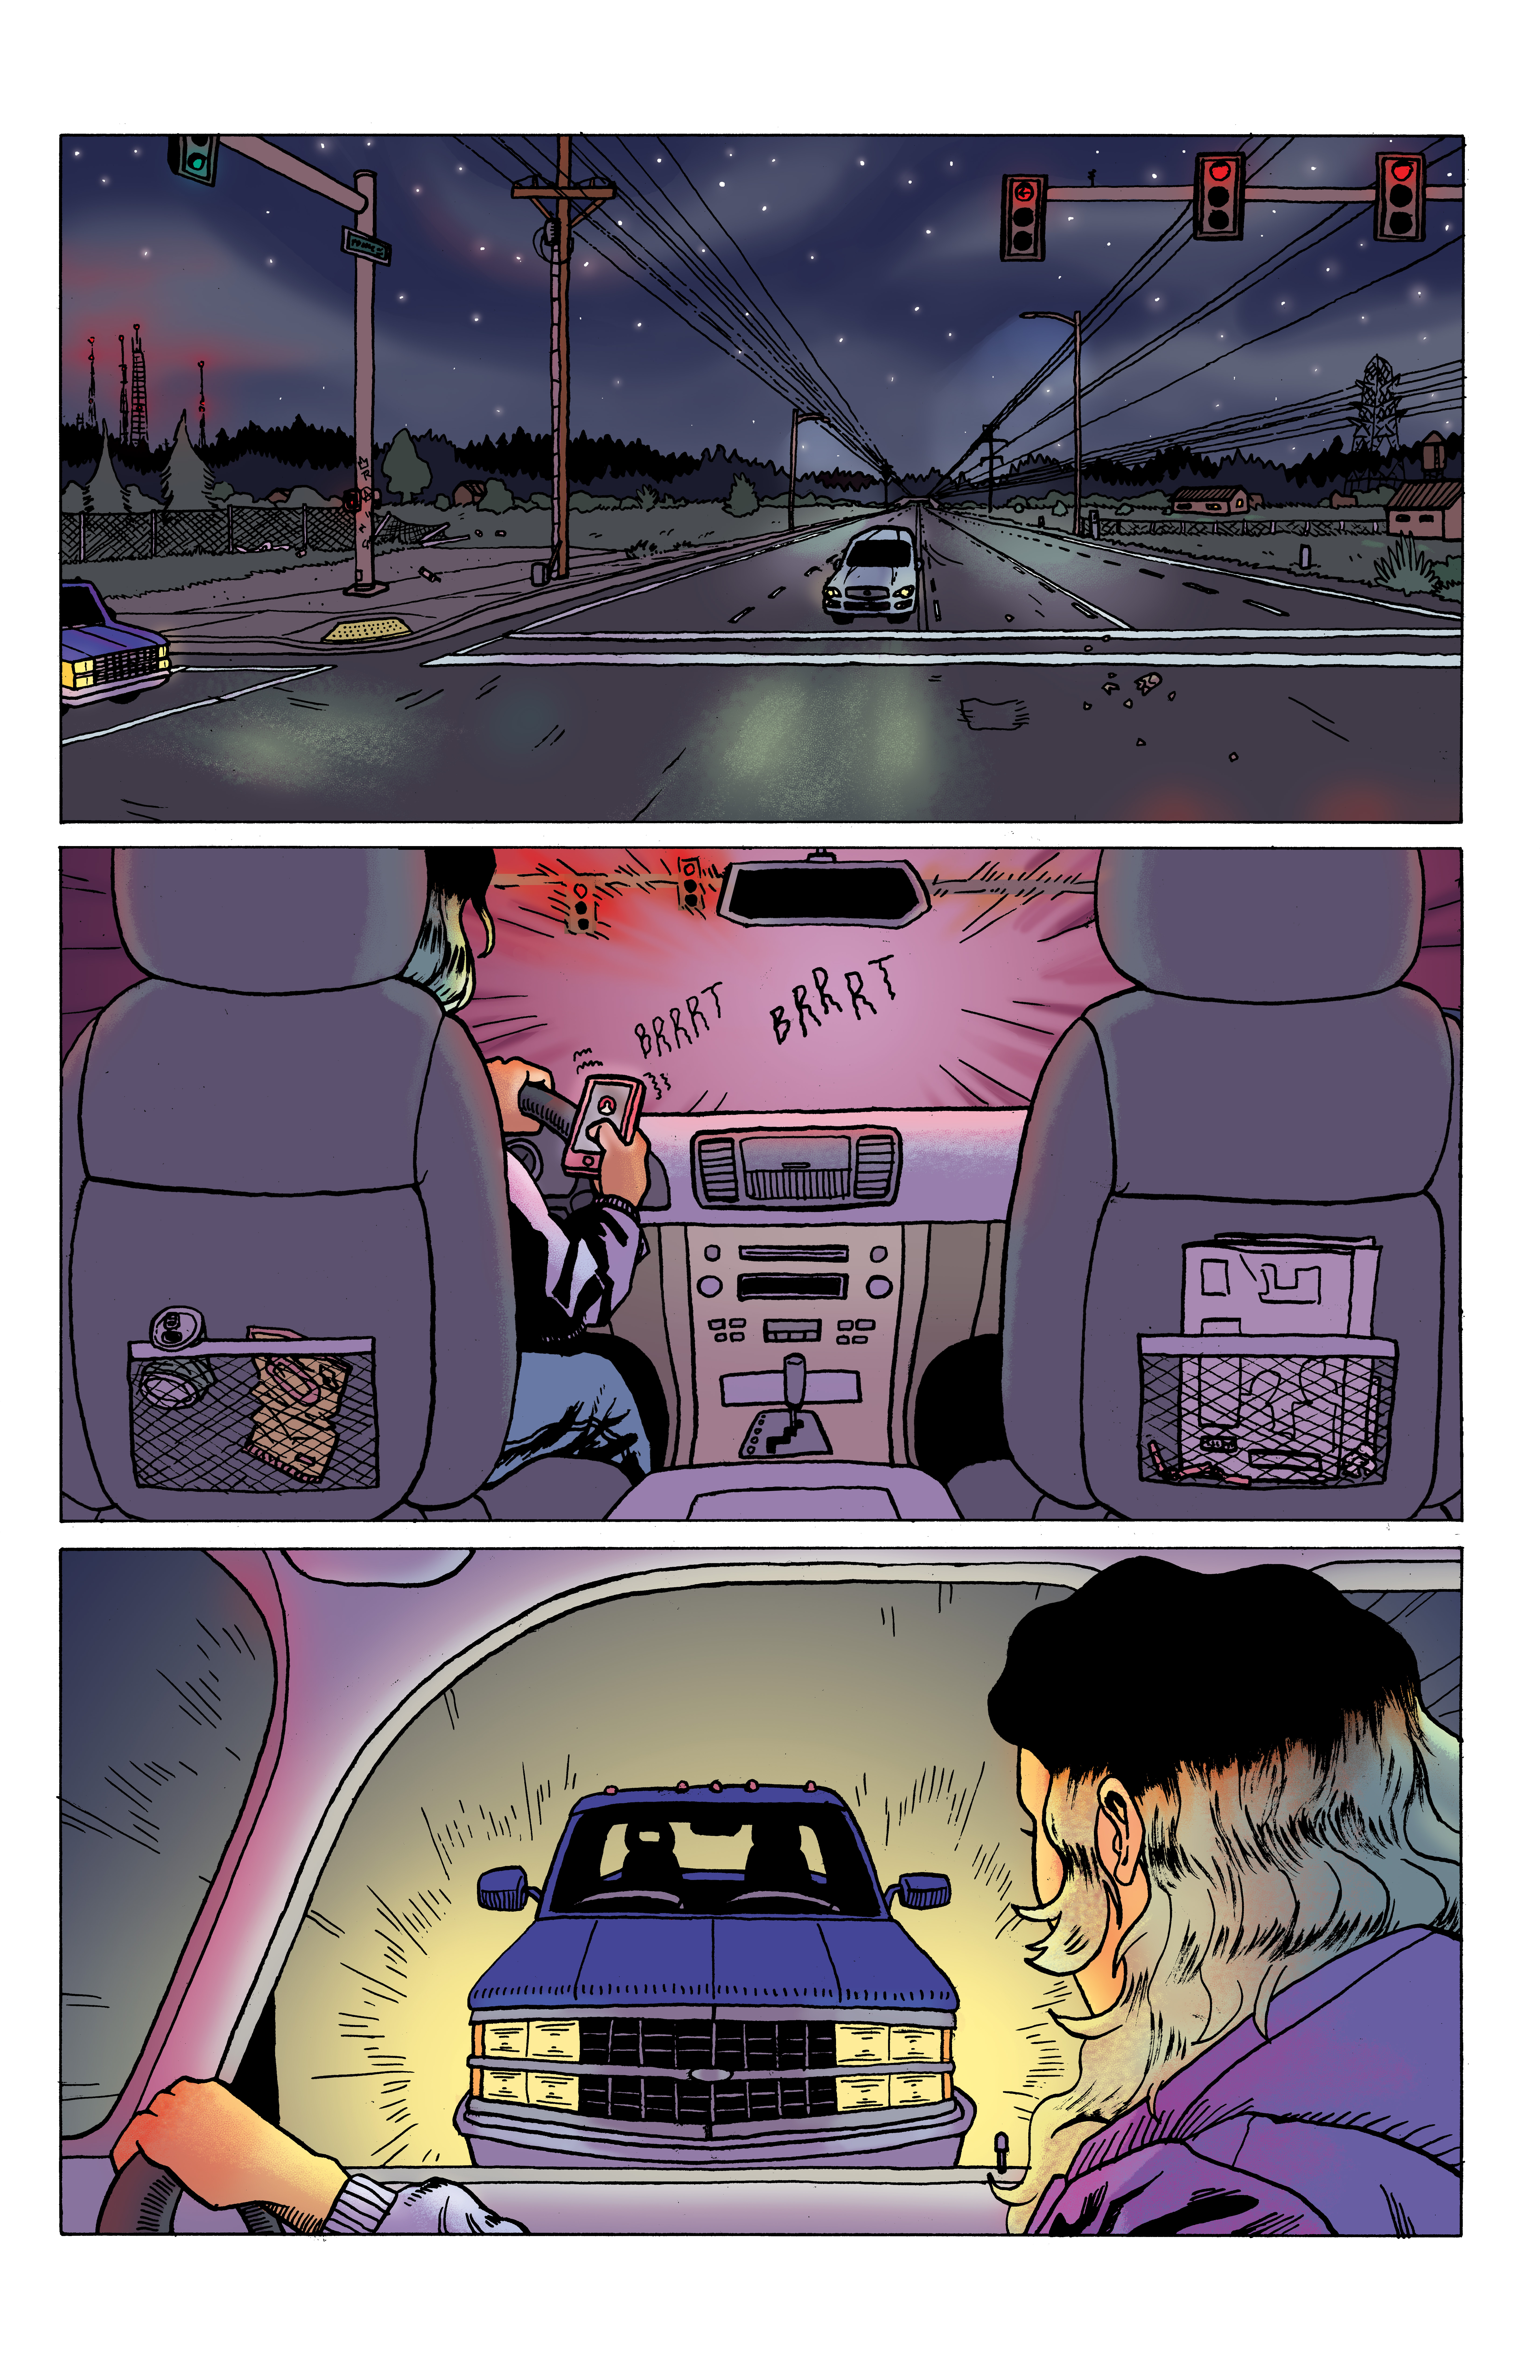 A color comics page depicting a three panel sequence where a car runs a red light down a nighttime street while the driver looks at her ringing phone. From the right, a truck approaches.